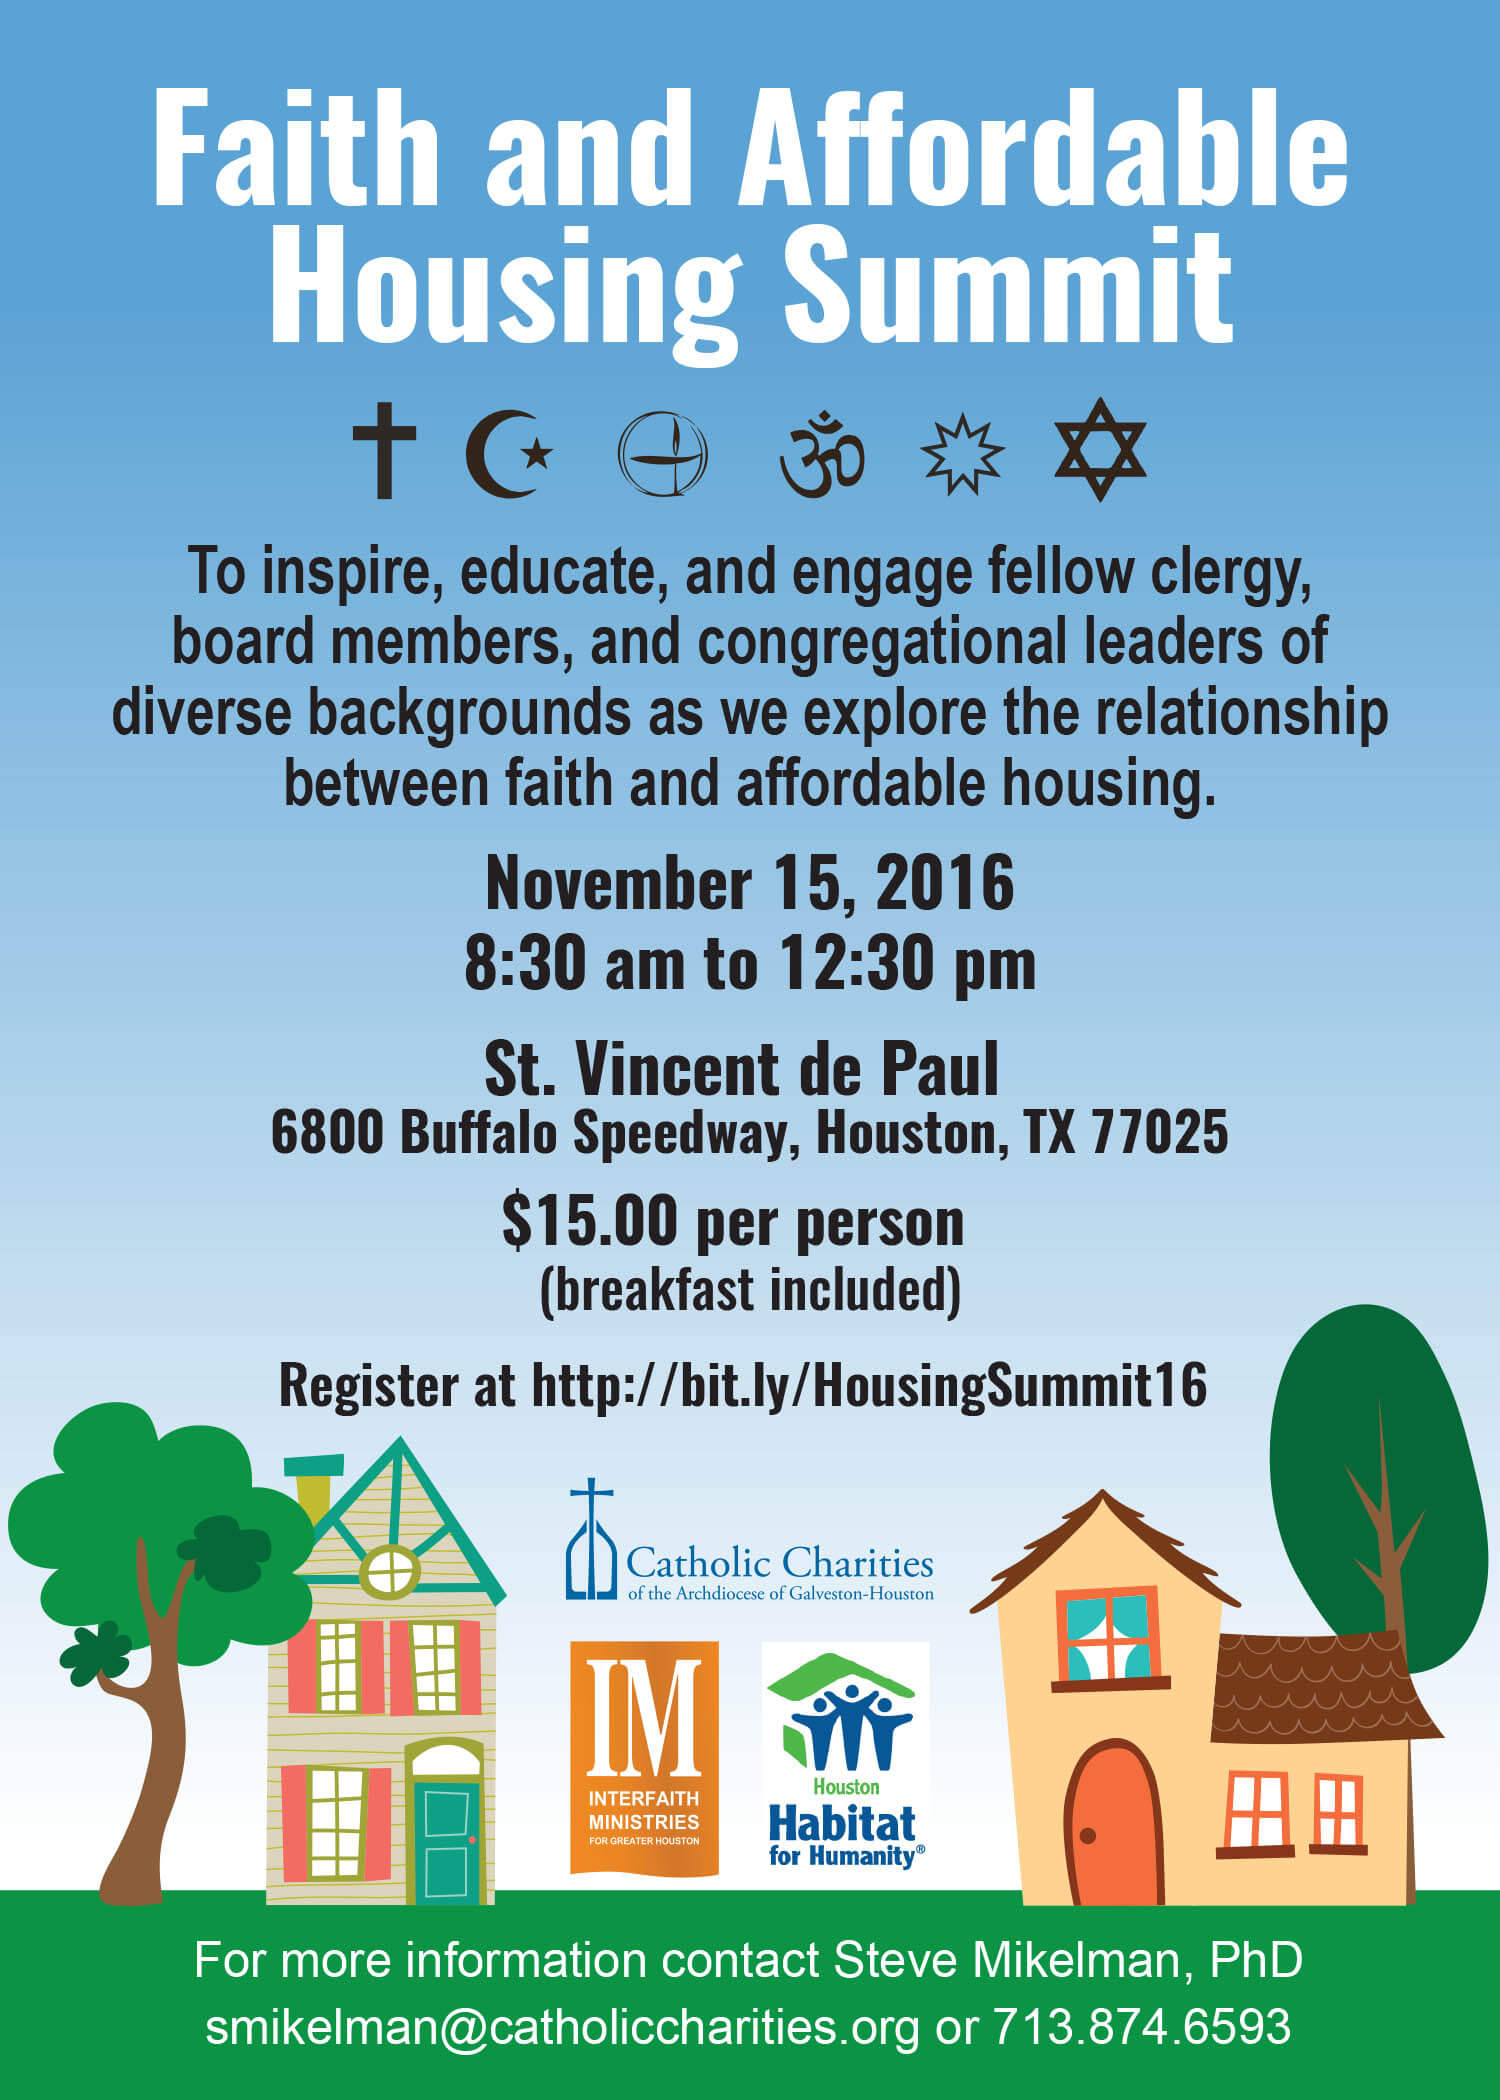 Faith and Affordable Housing Summit 16